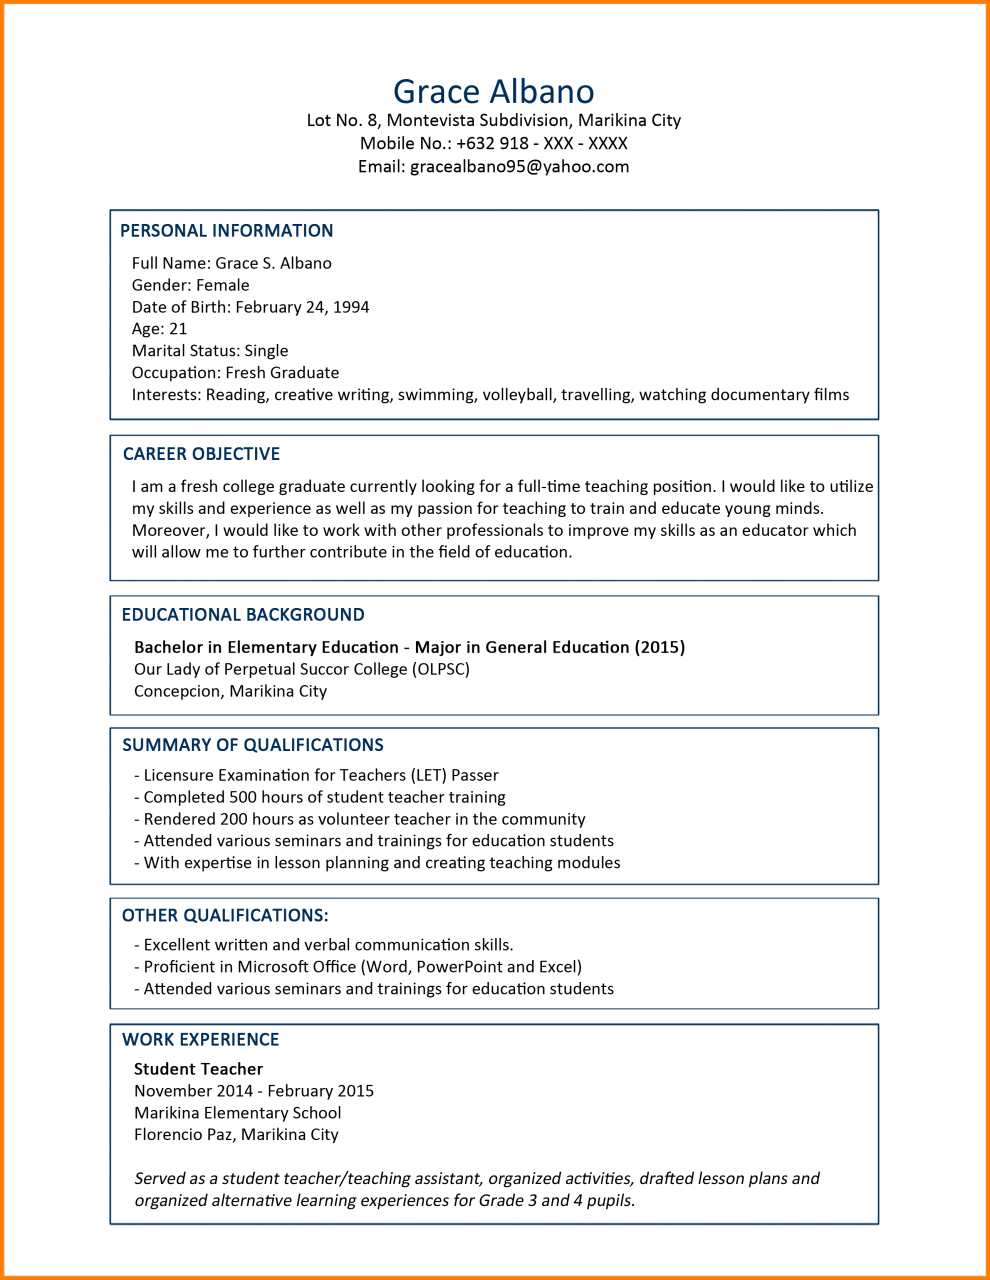 Example Resume For Fresh Graduates With No Experience